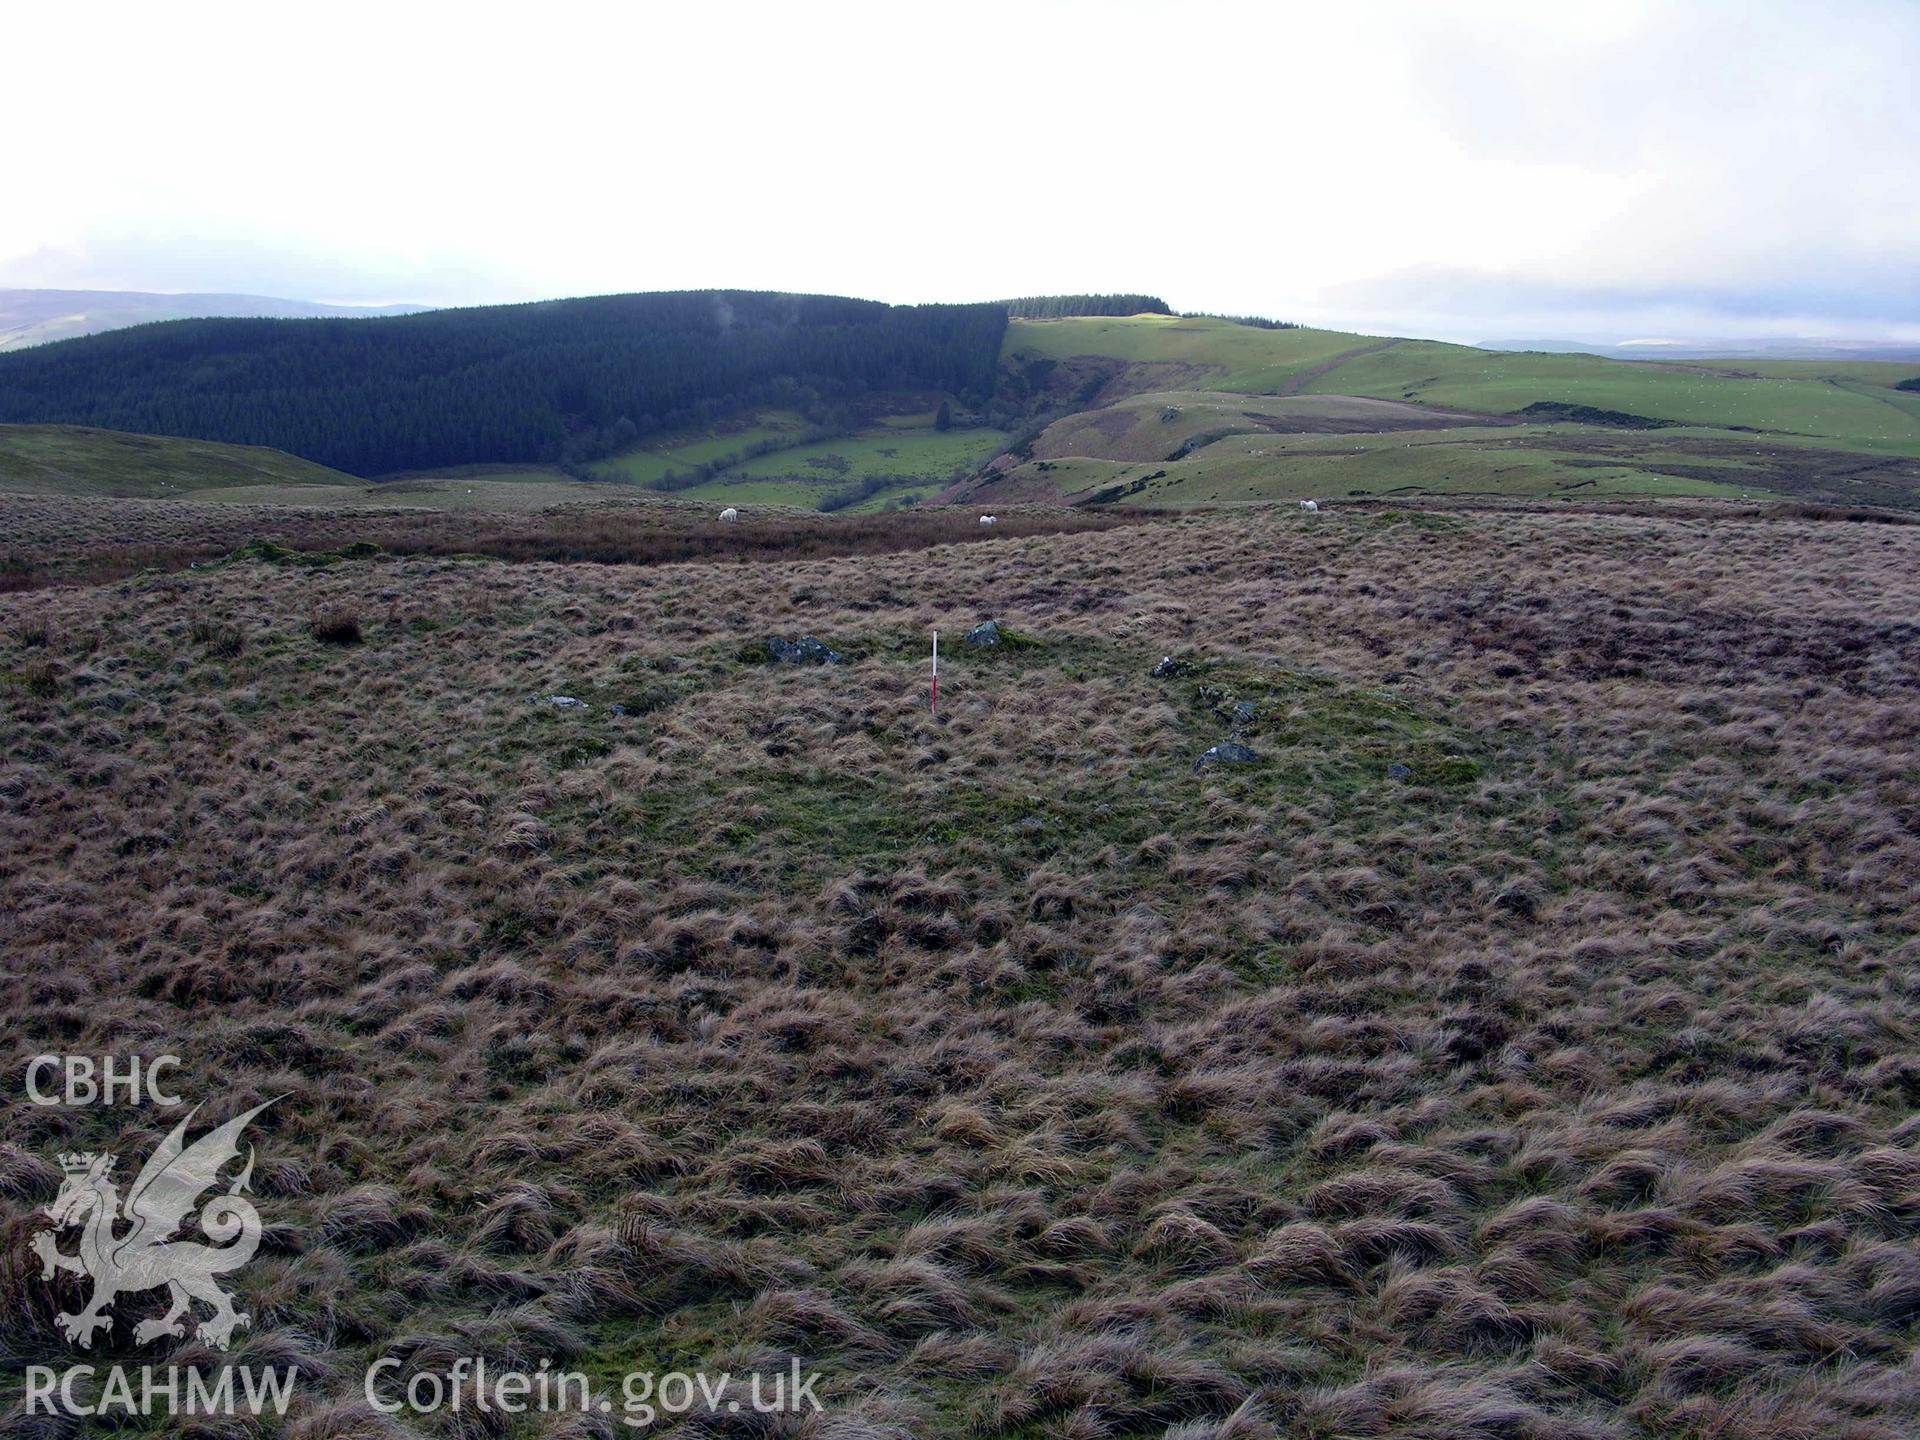 Colour digital photograph showing view of Bronze Age roundhouse (Graig y Llyn Mawr Hut III - PRN 917) - part of archaeological desk based assessment for Esgair Cwmowen, Carno (CAP Report 549).